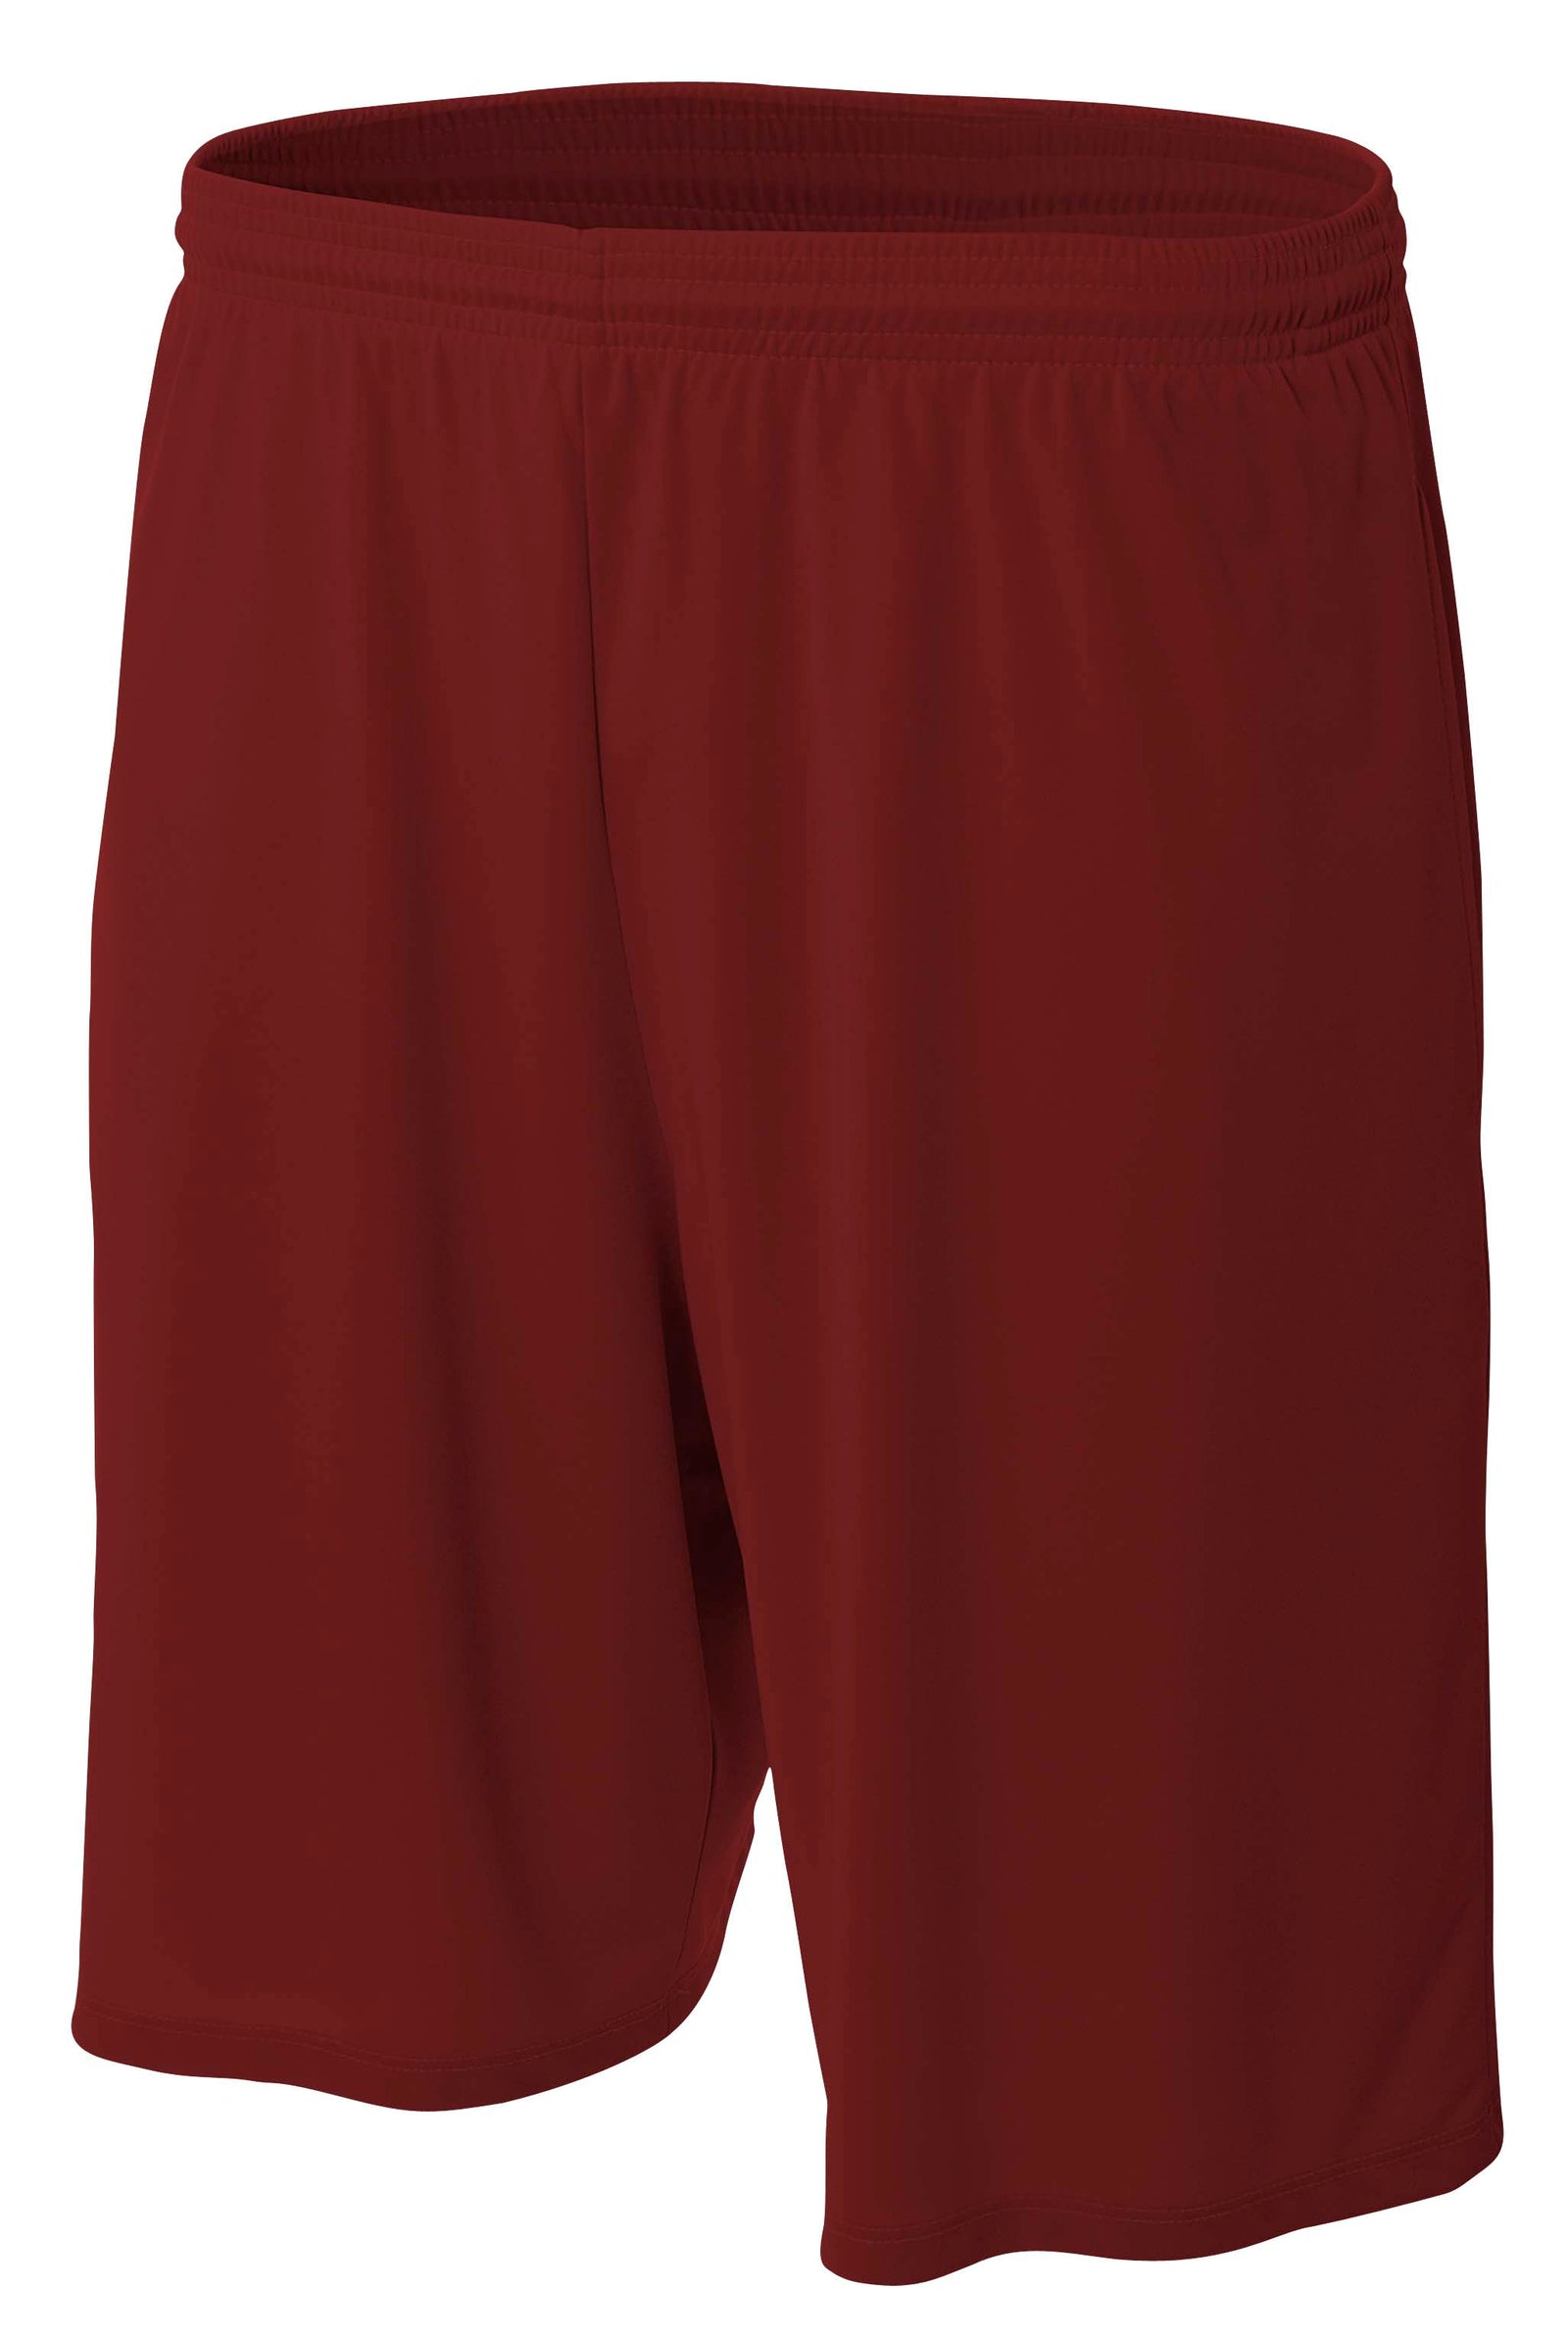 Maroon A4 9" Moisture Management Pocketed Short